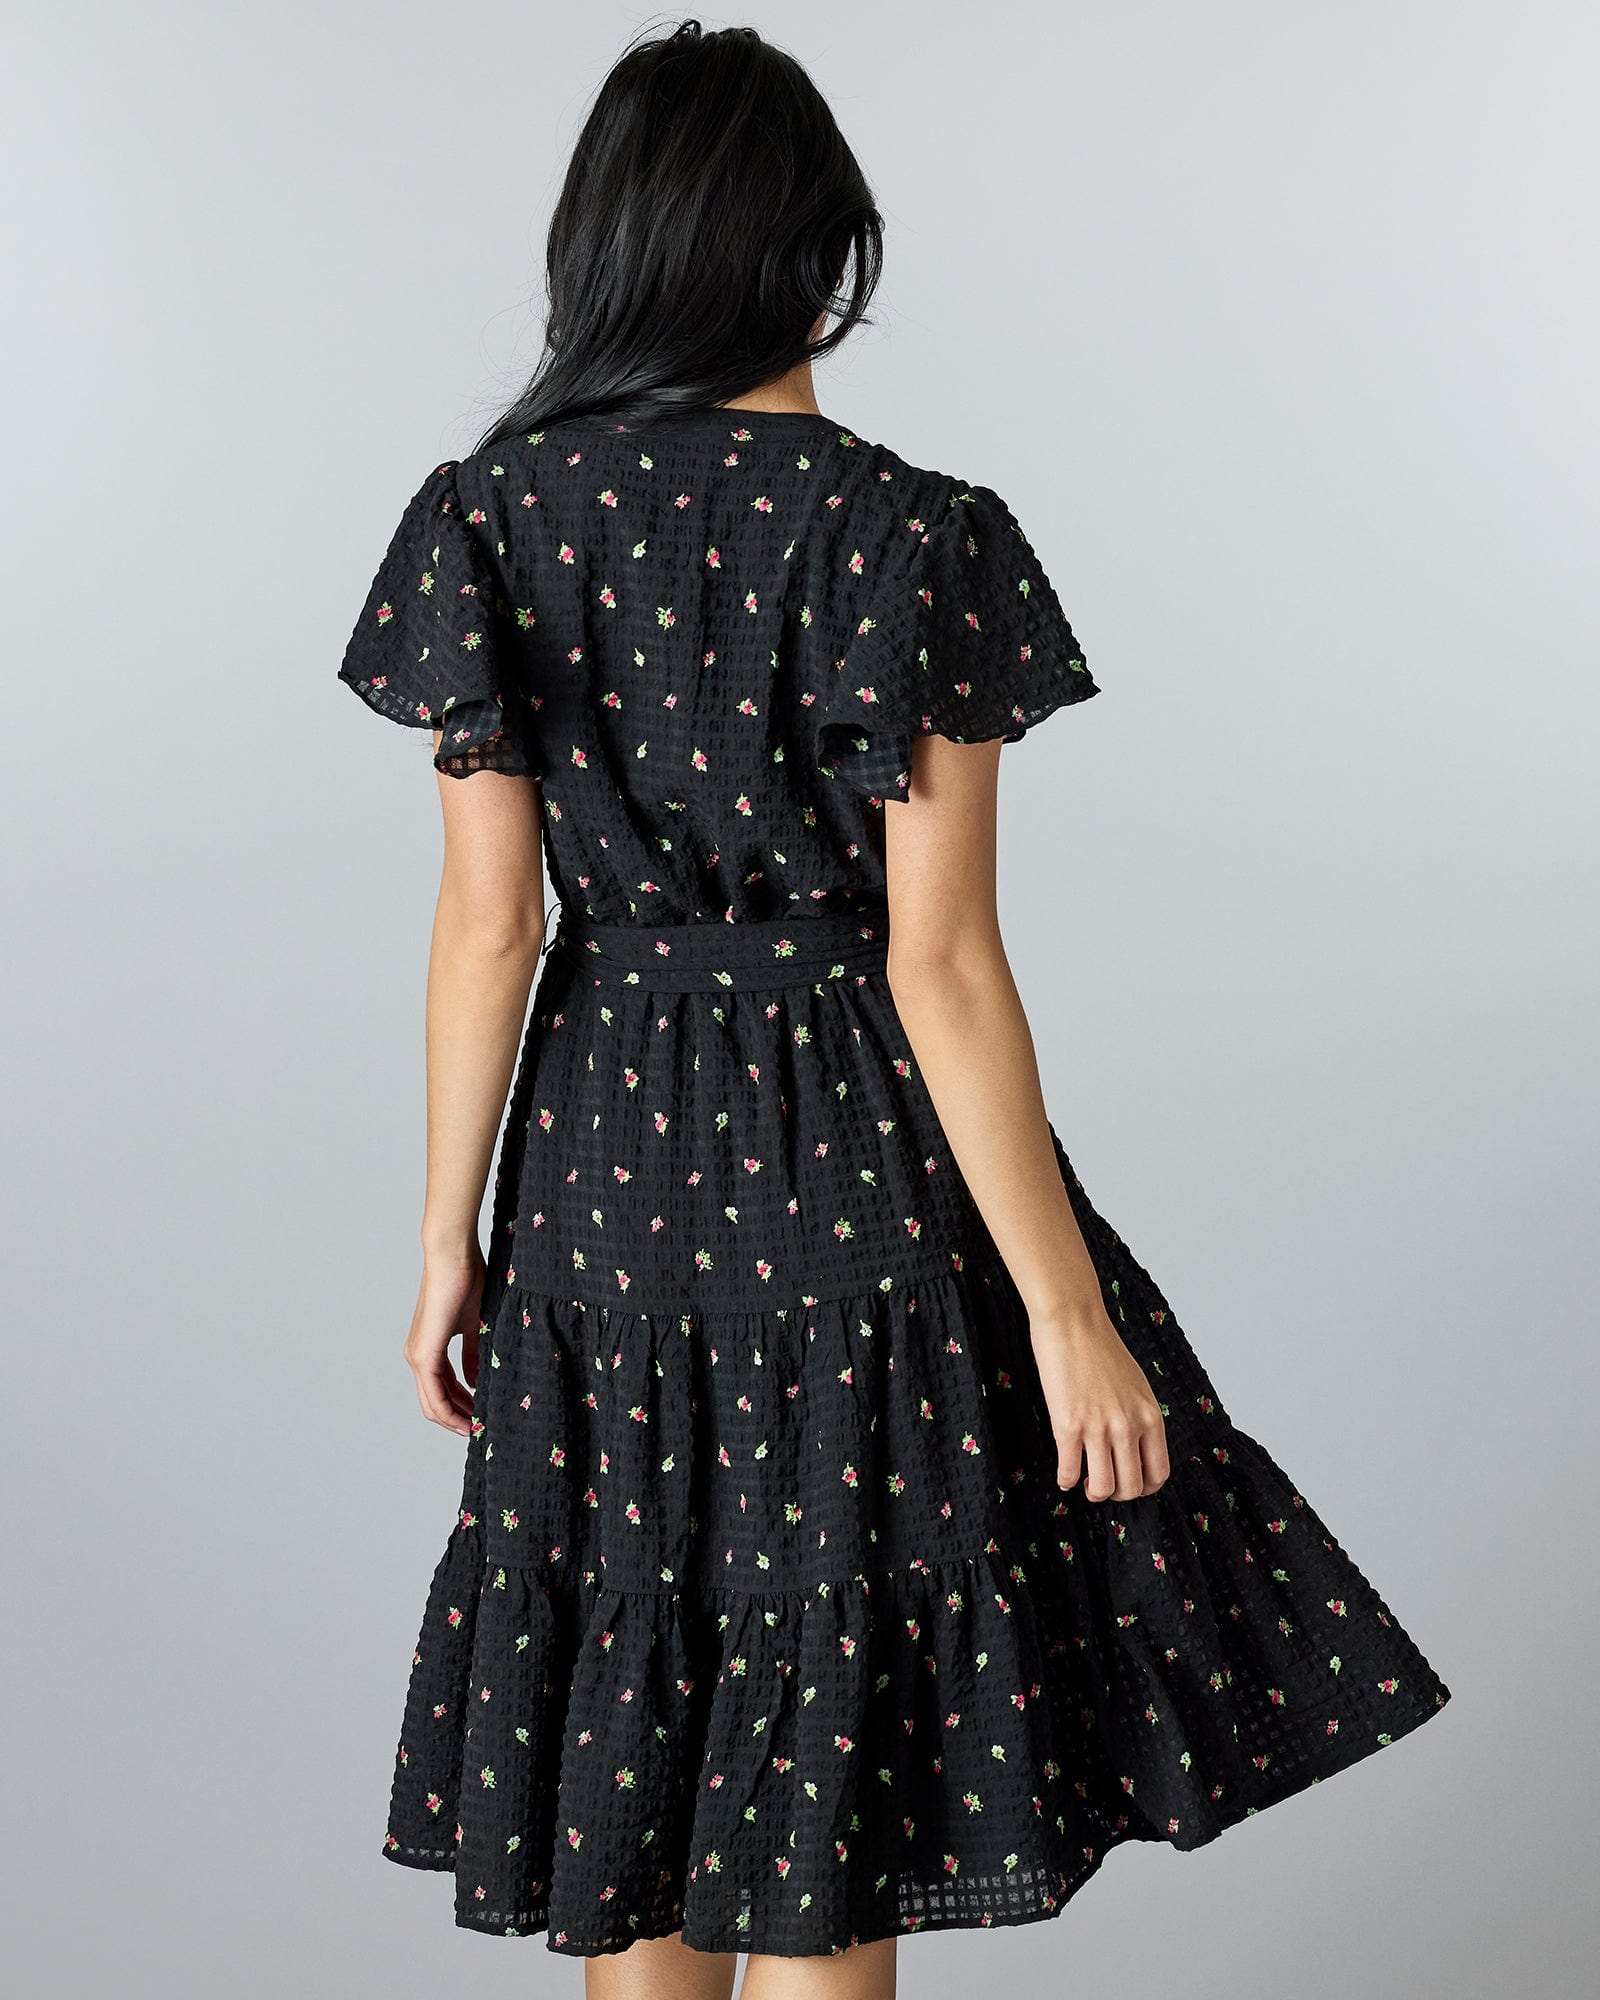 Woman in a black, floral print midi-length dress with a v-neck and short sleeves.